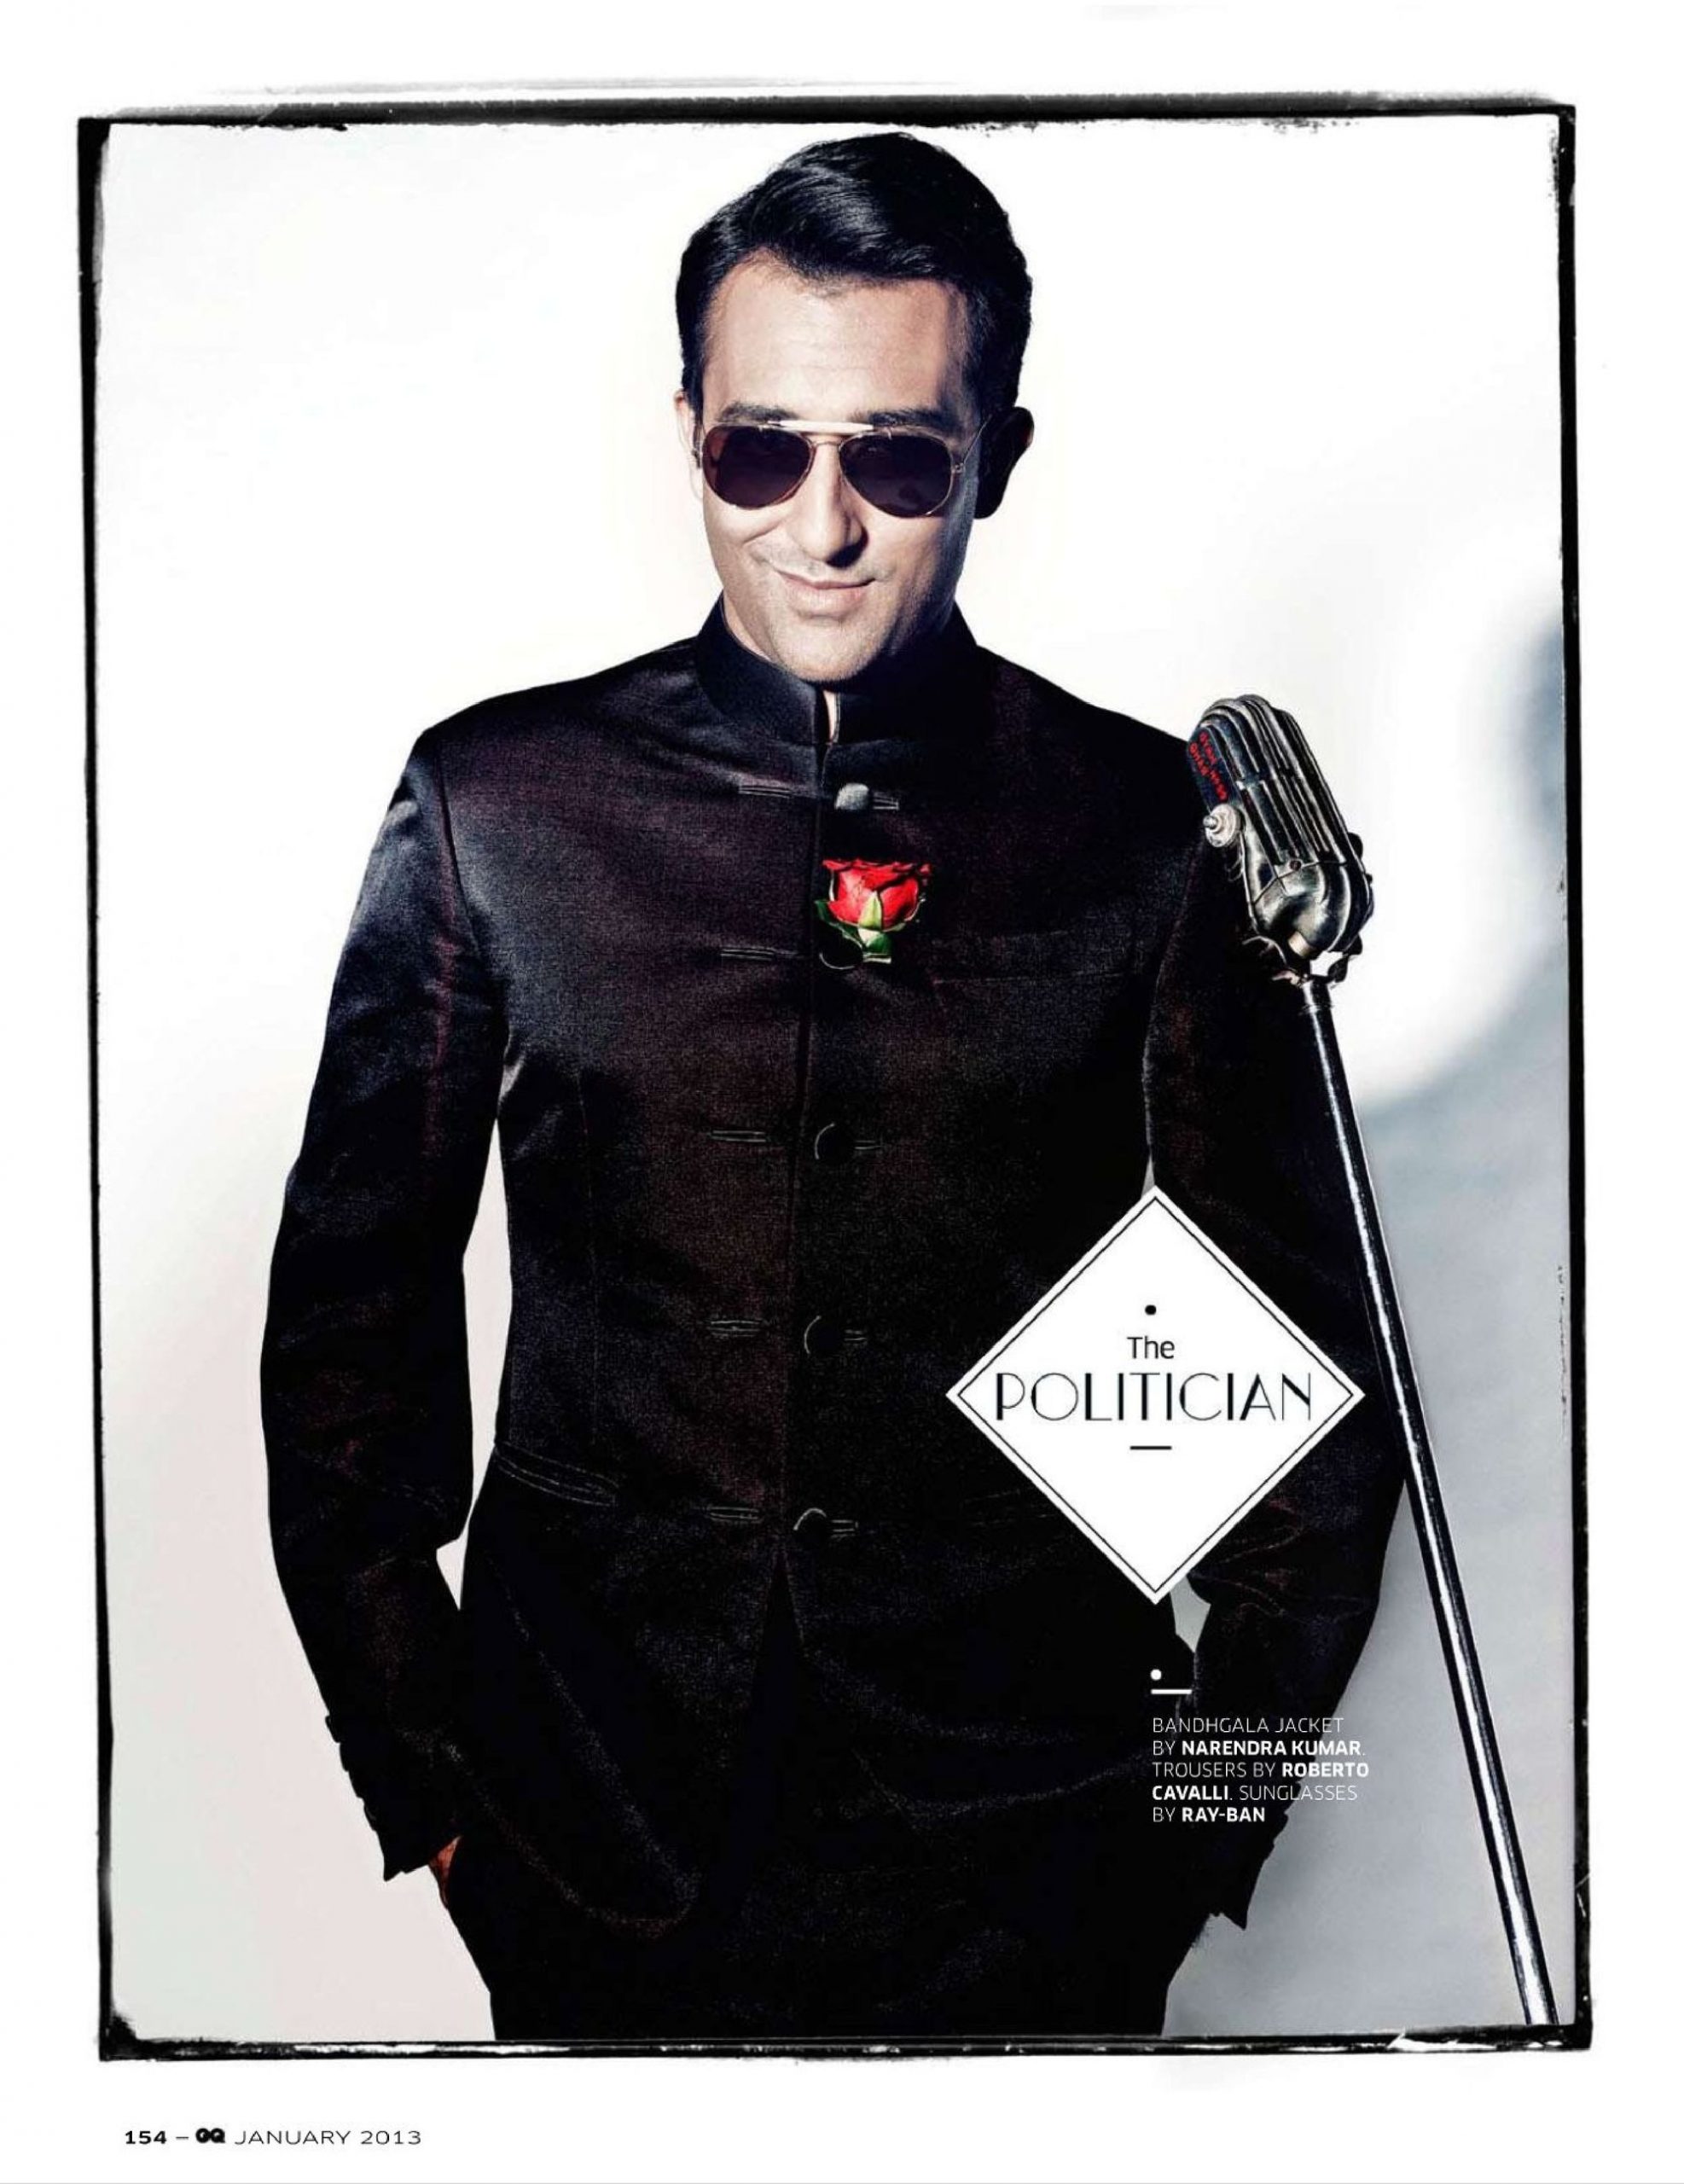 The Rahul Khanna spread in GQ India's January 2013 issue